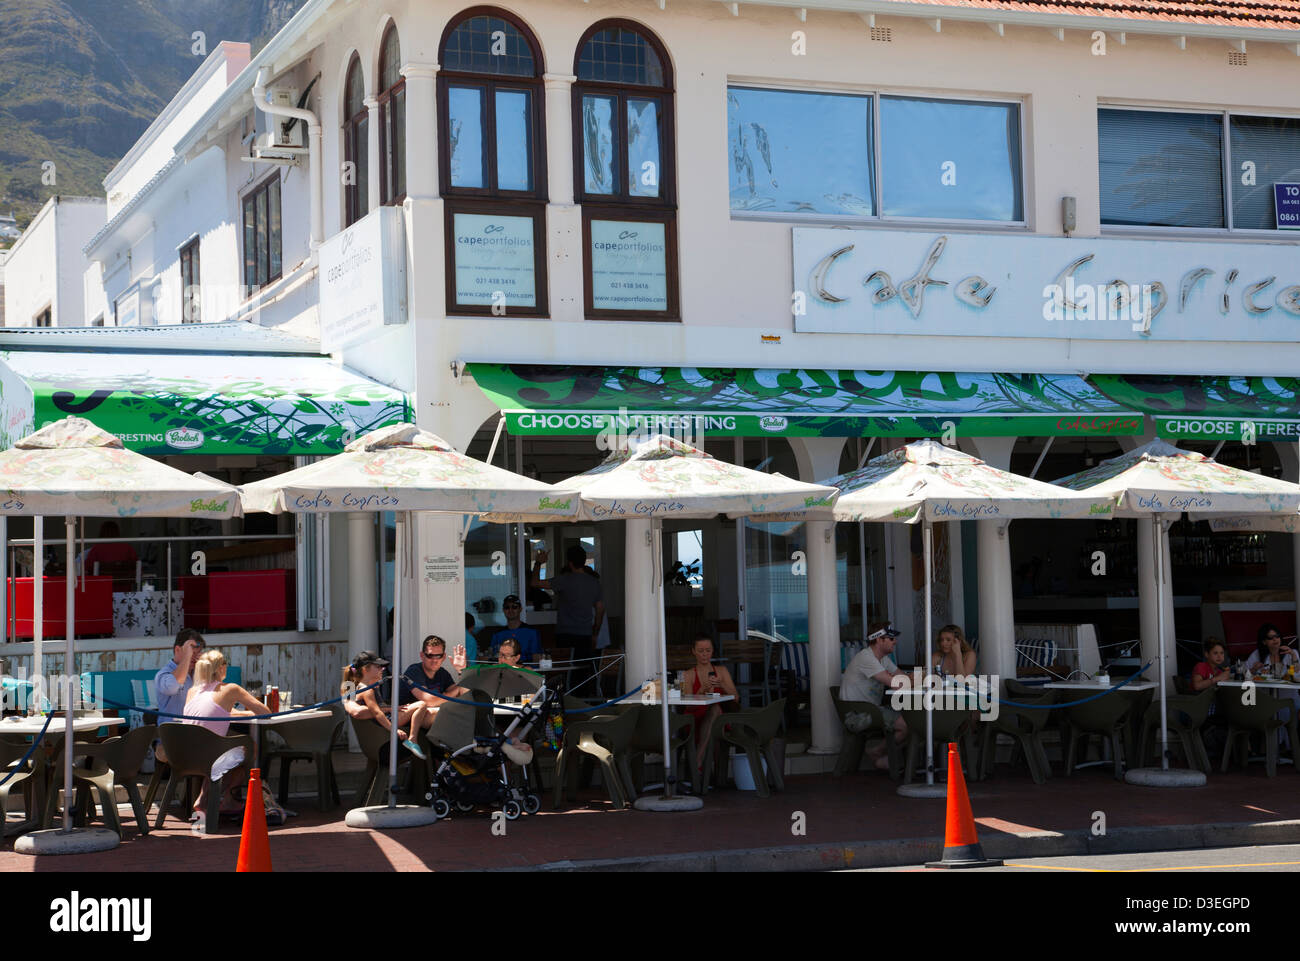 Cafe Caprice on Camps Bay Beach Road - Cape Town - South Africa Stock Photo  - Alamy